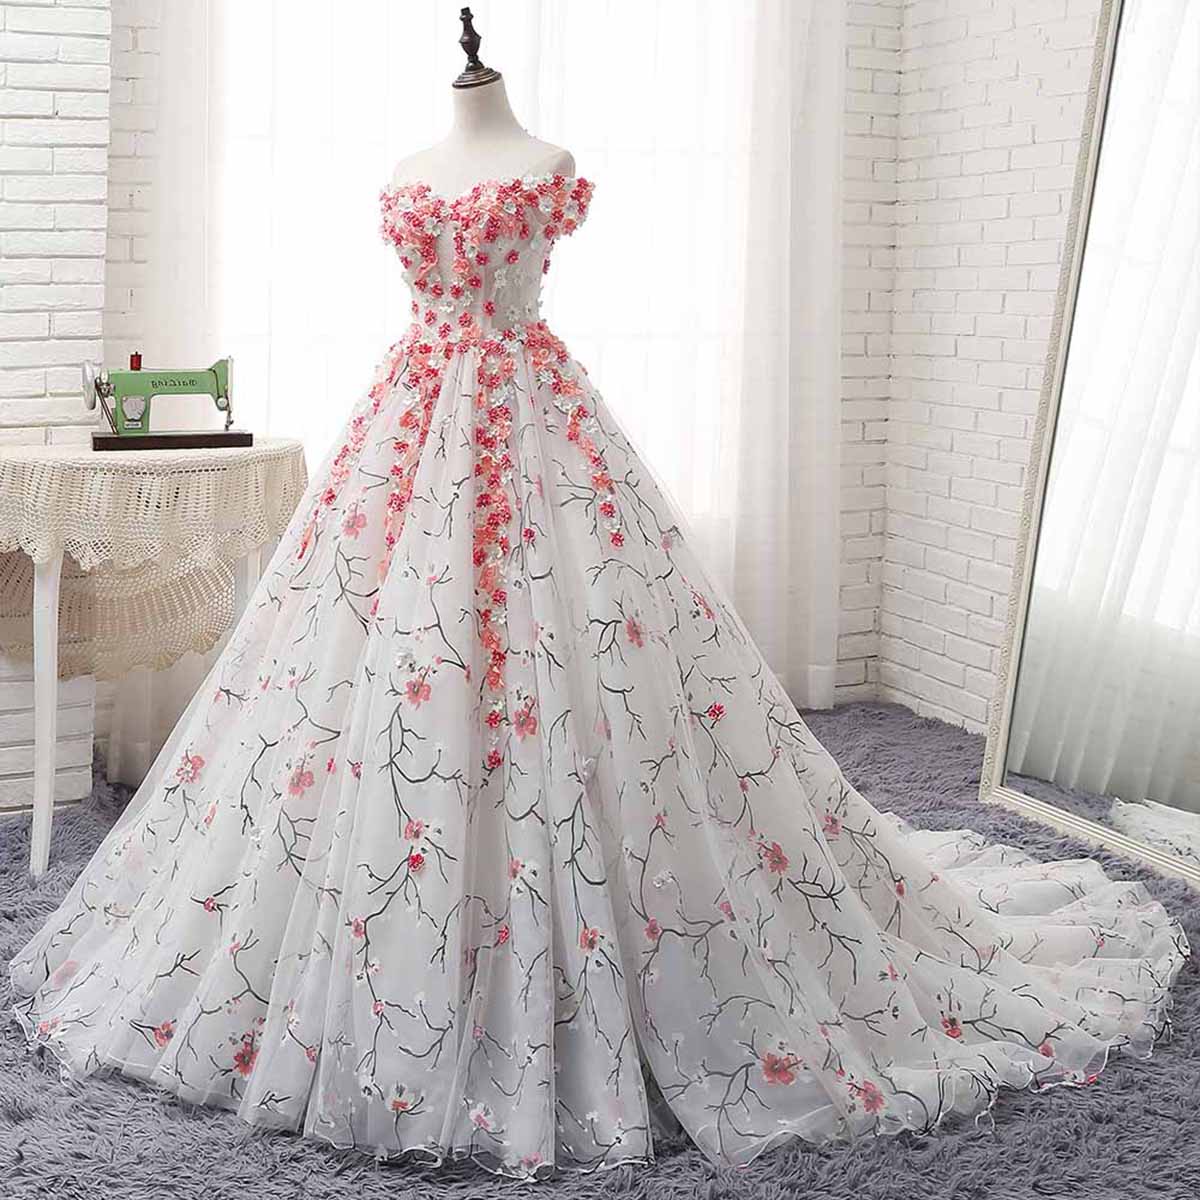 White Floral Tulle Sweetheart 3d Flower Applique A-line Evening Dress, Homecoming Dress With Sleeve,custom Made